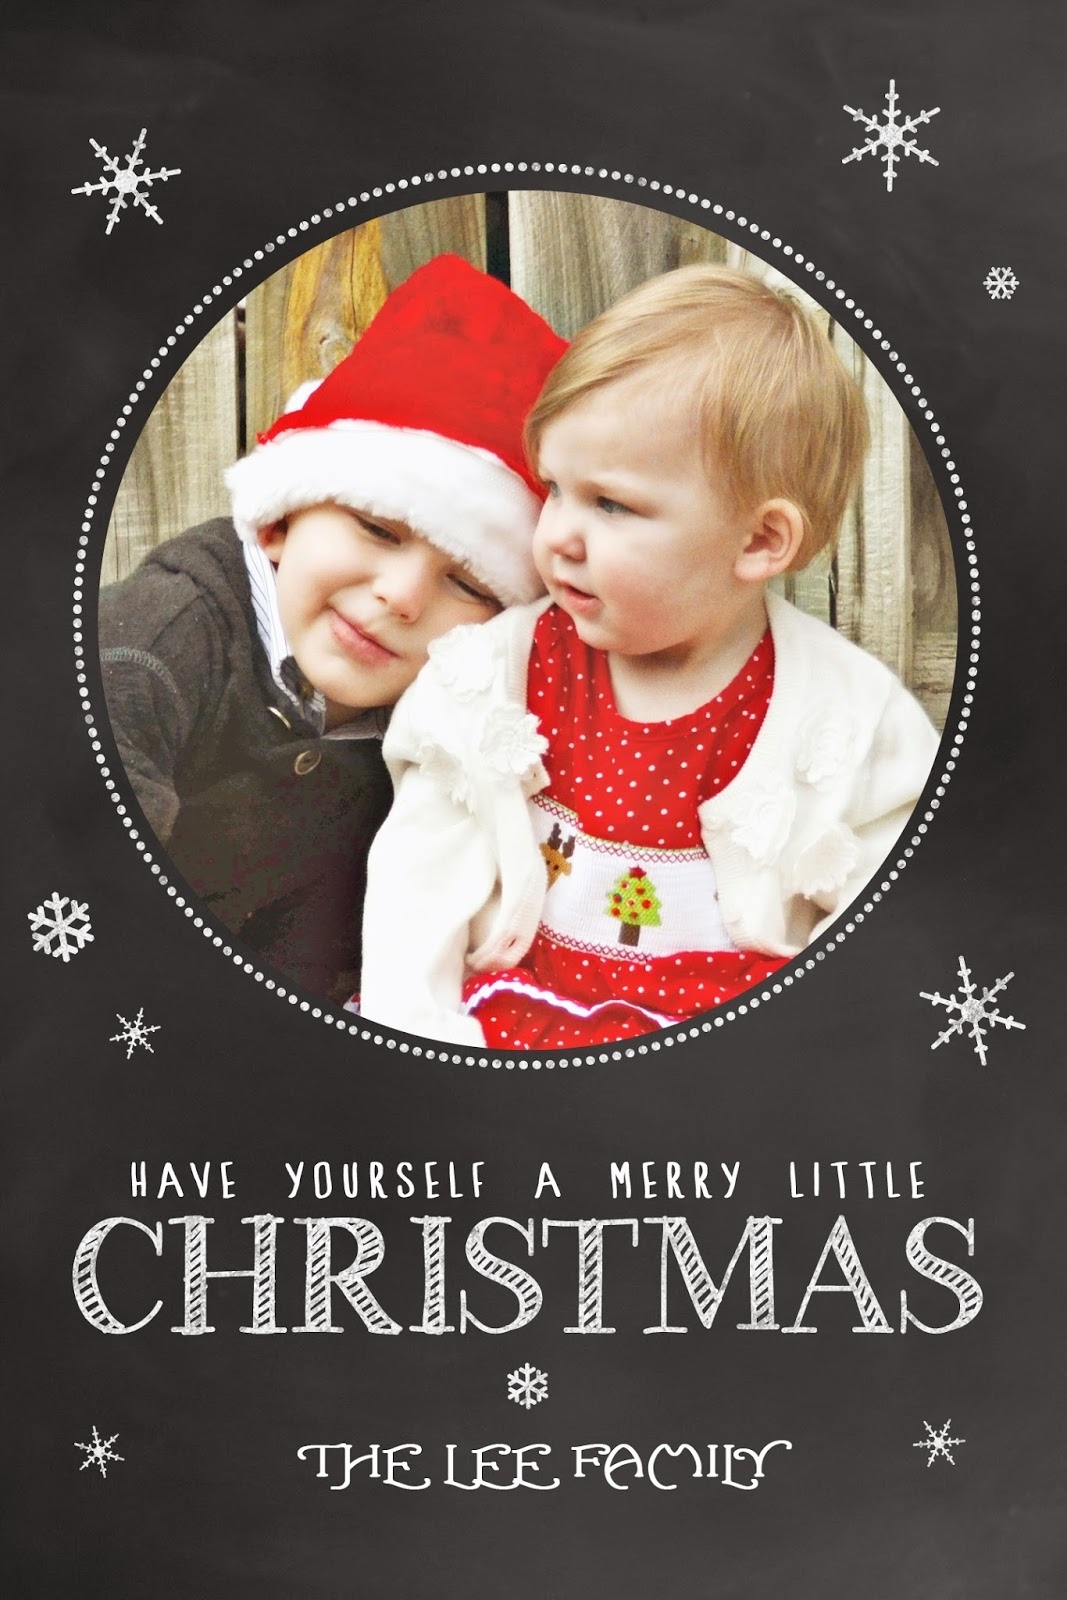 8 Free Photoshop Christmas Card Templates Images – Photoshop Christmas Within Free Holiday Photo Card Templates